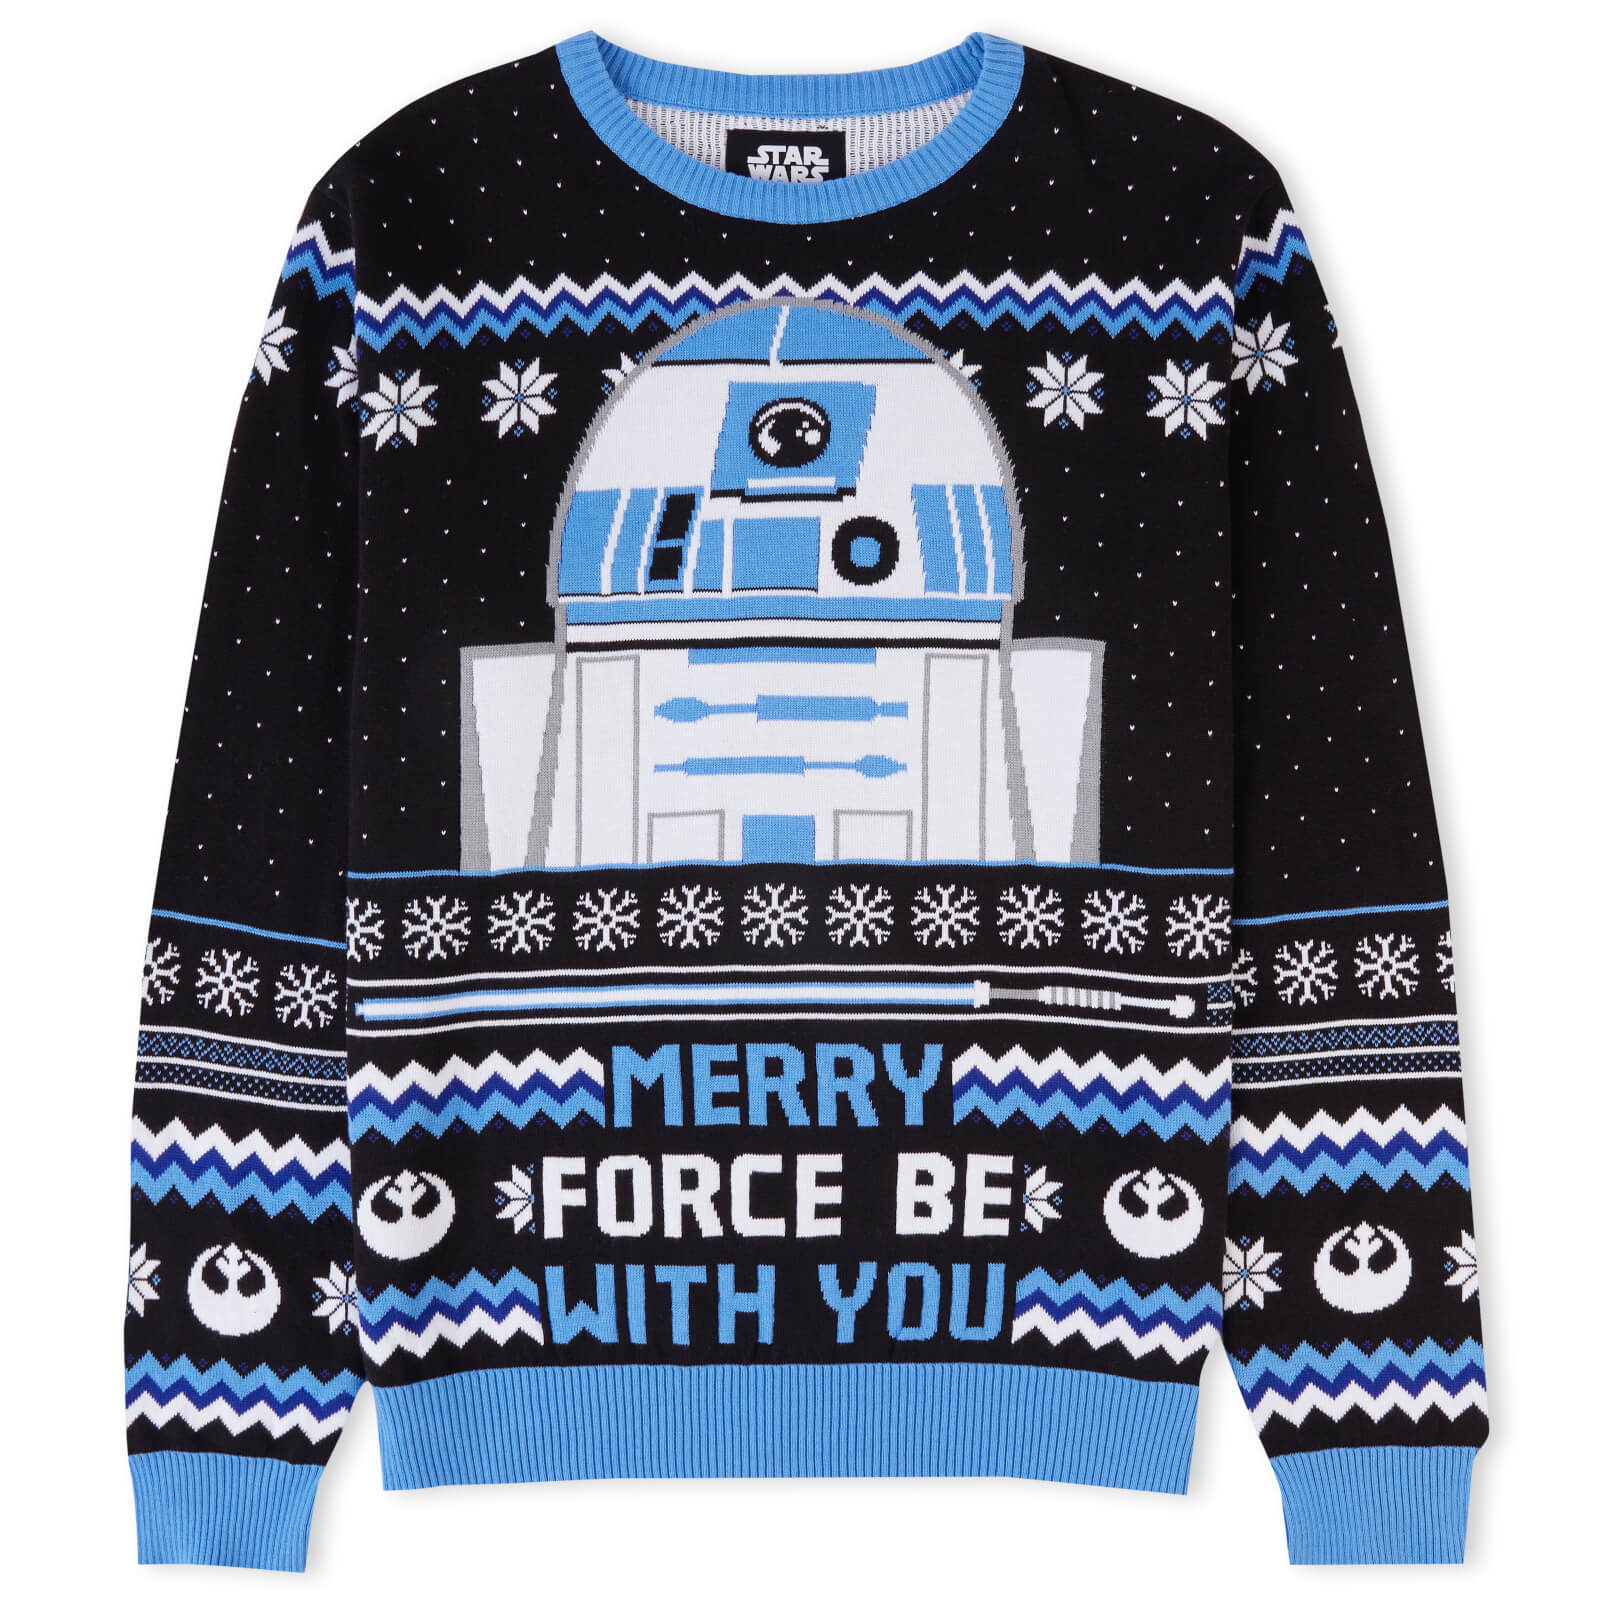 Merry Force Be With You Christmas Knitted Jumper Black - M